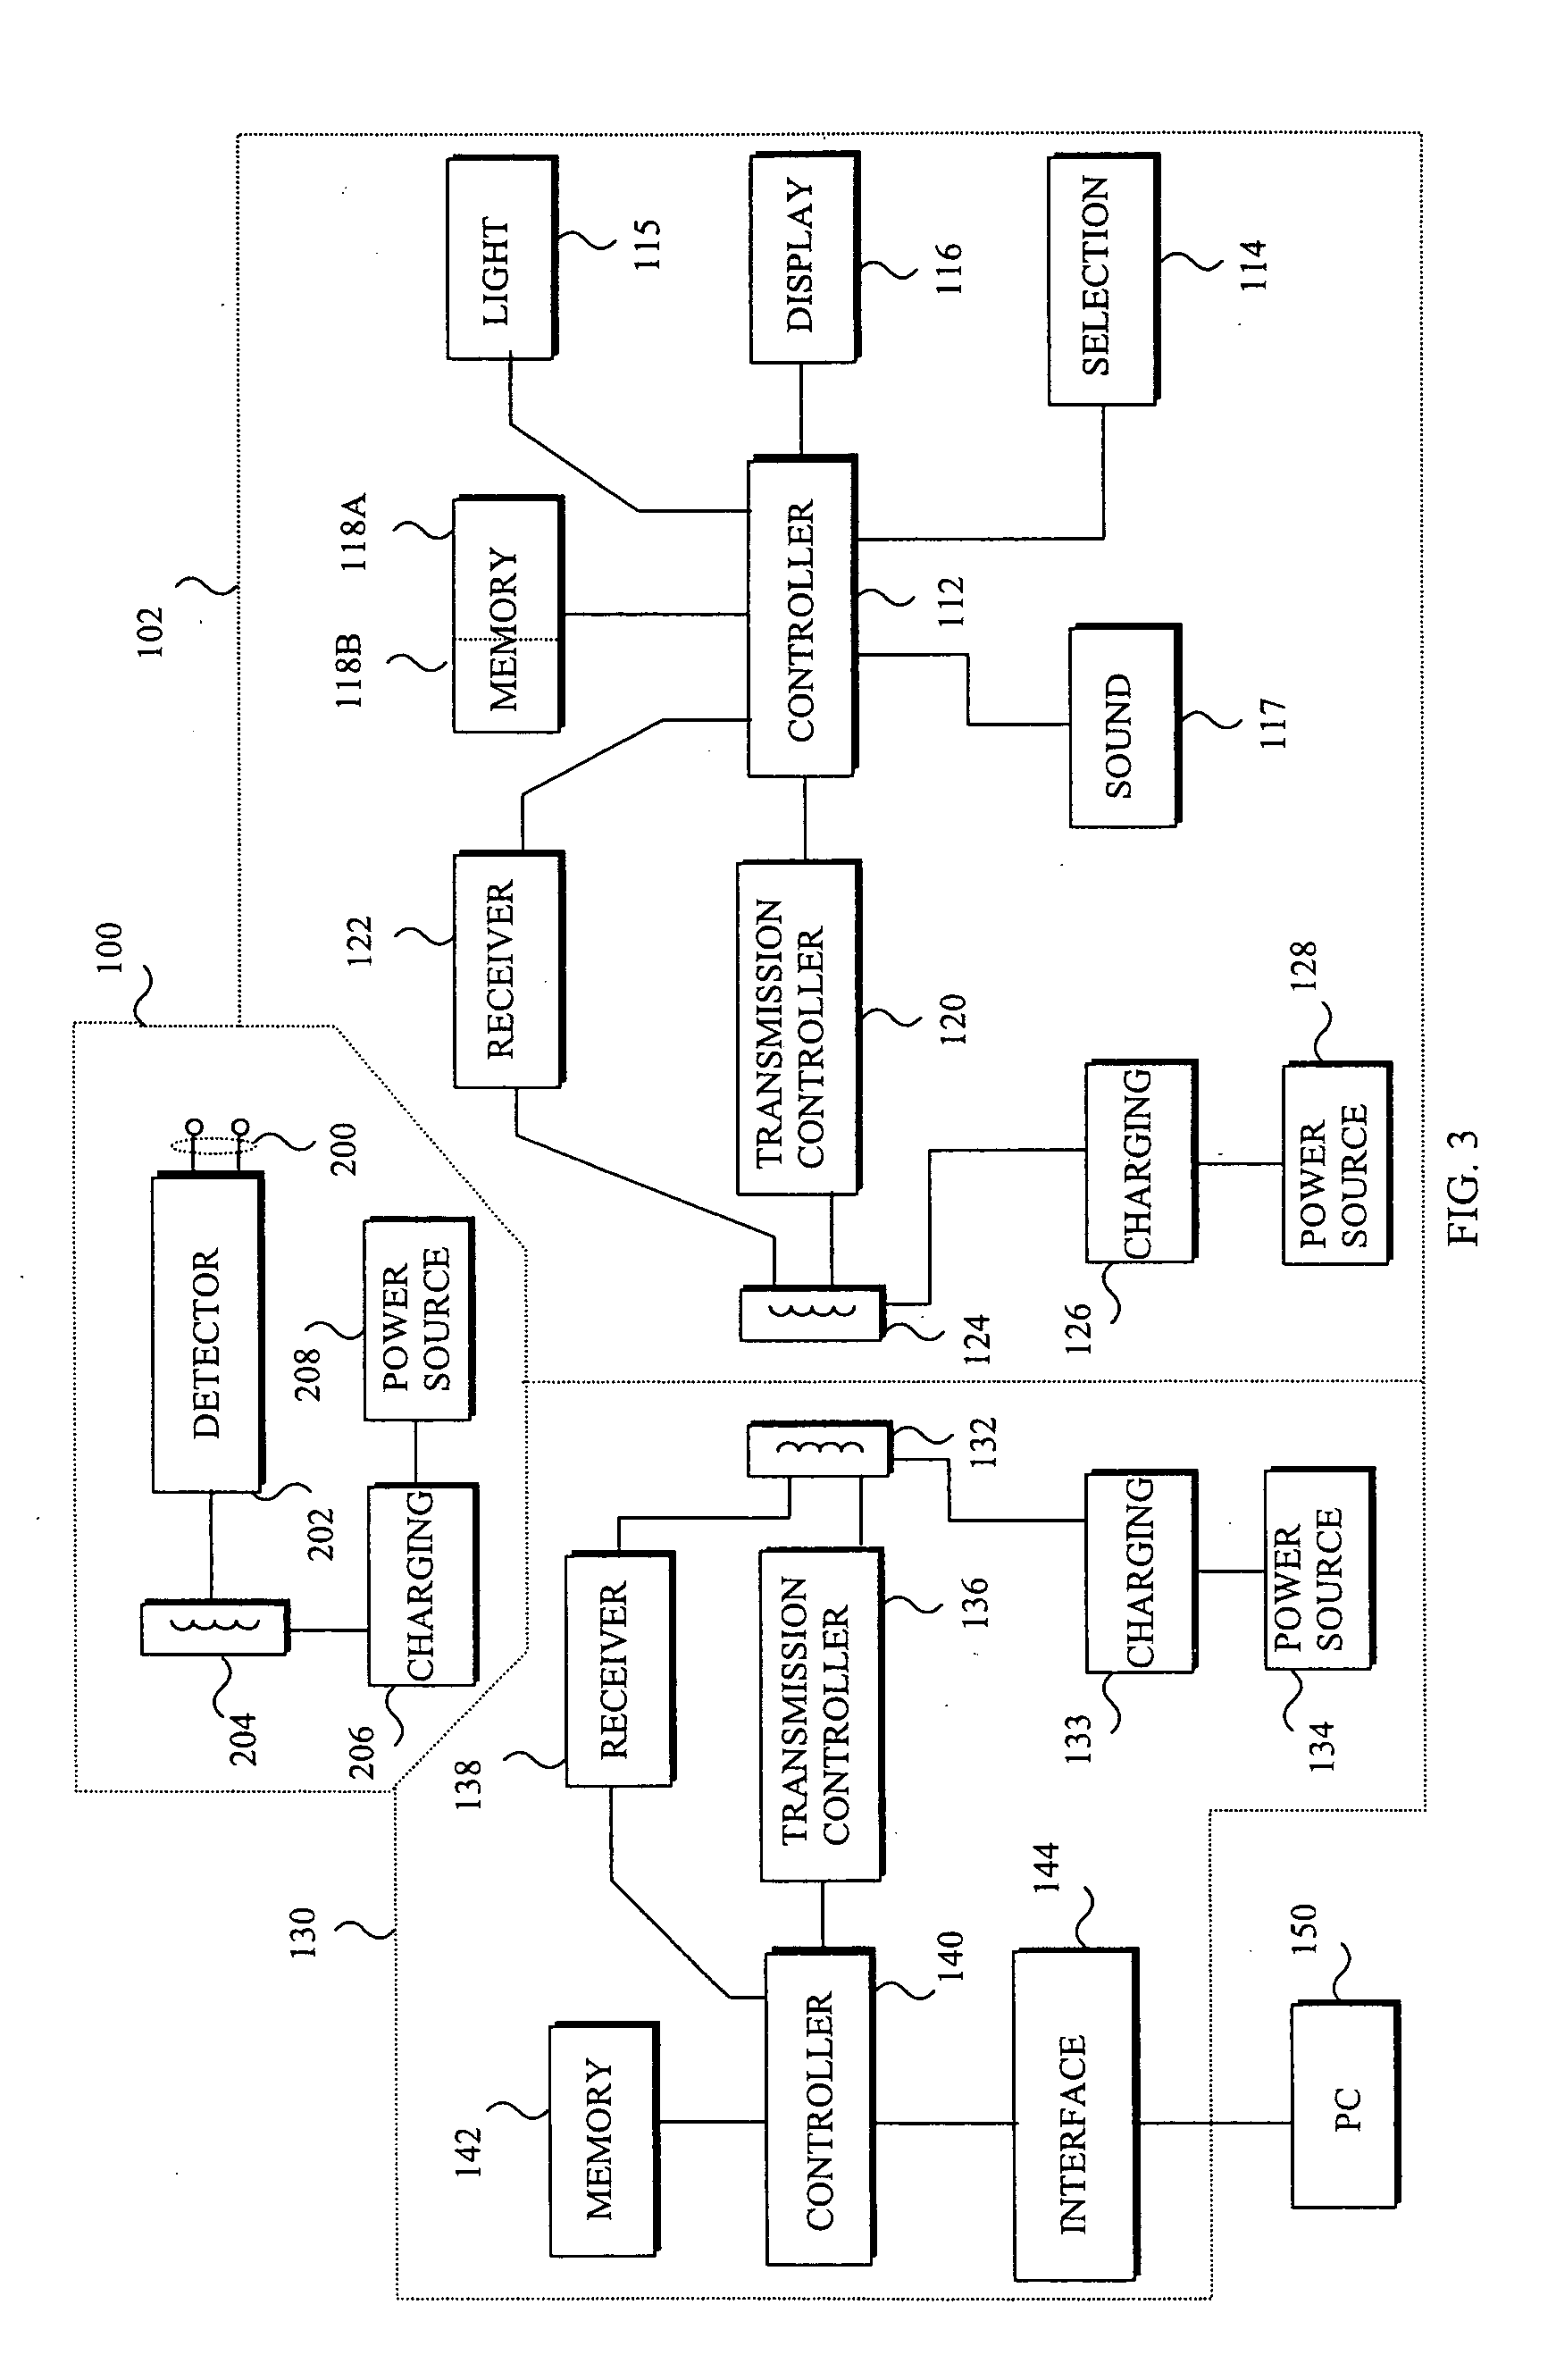 Method and device for measuring stress